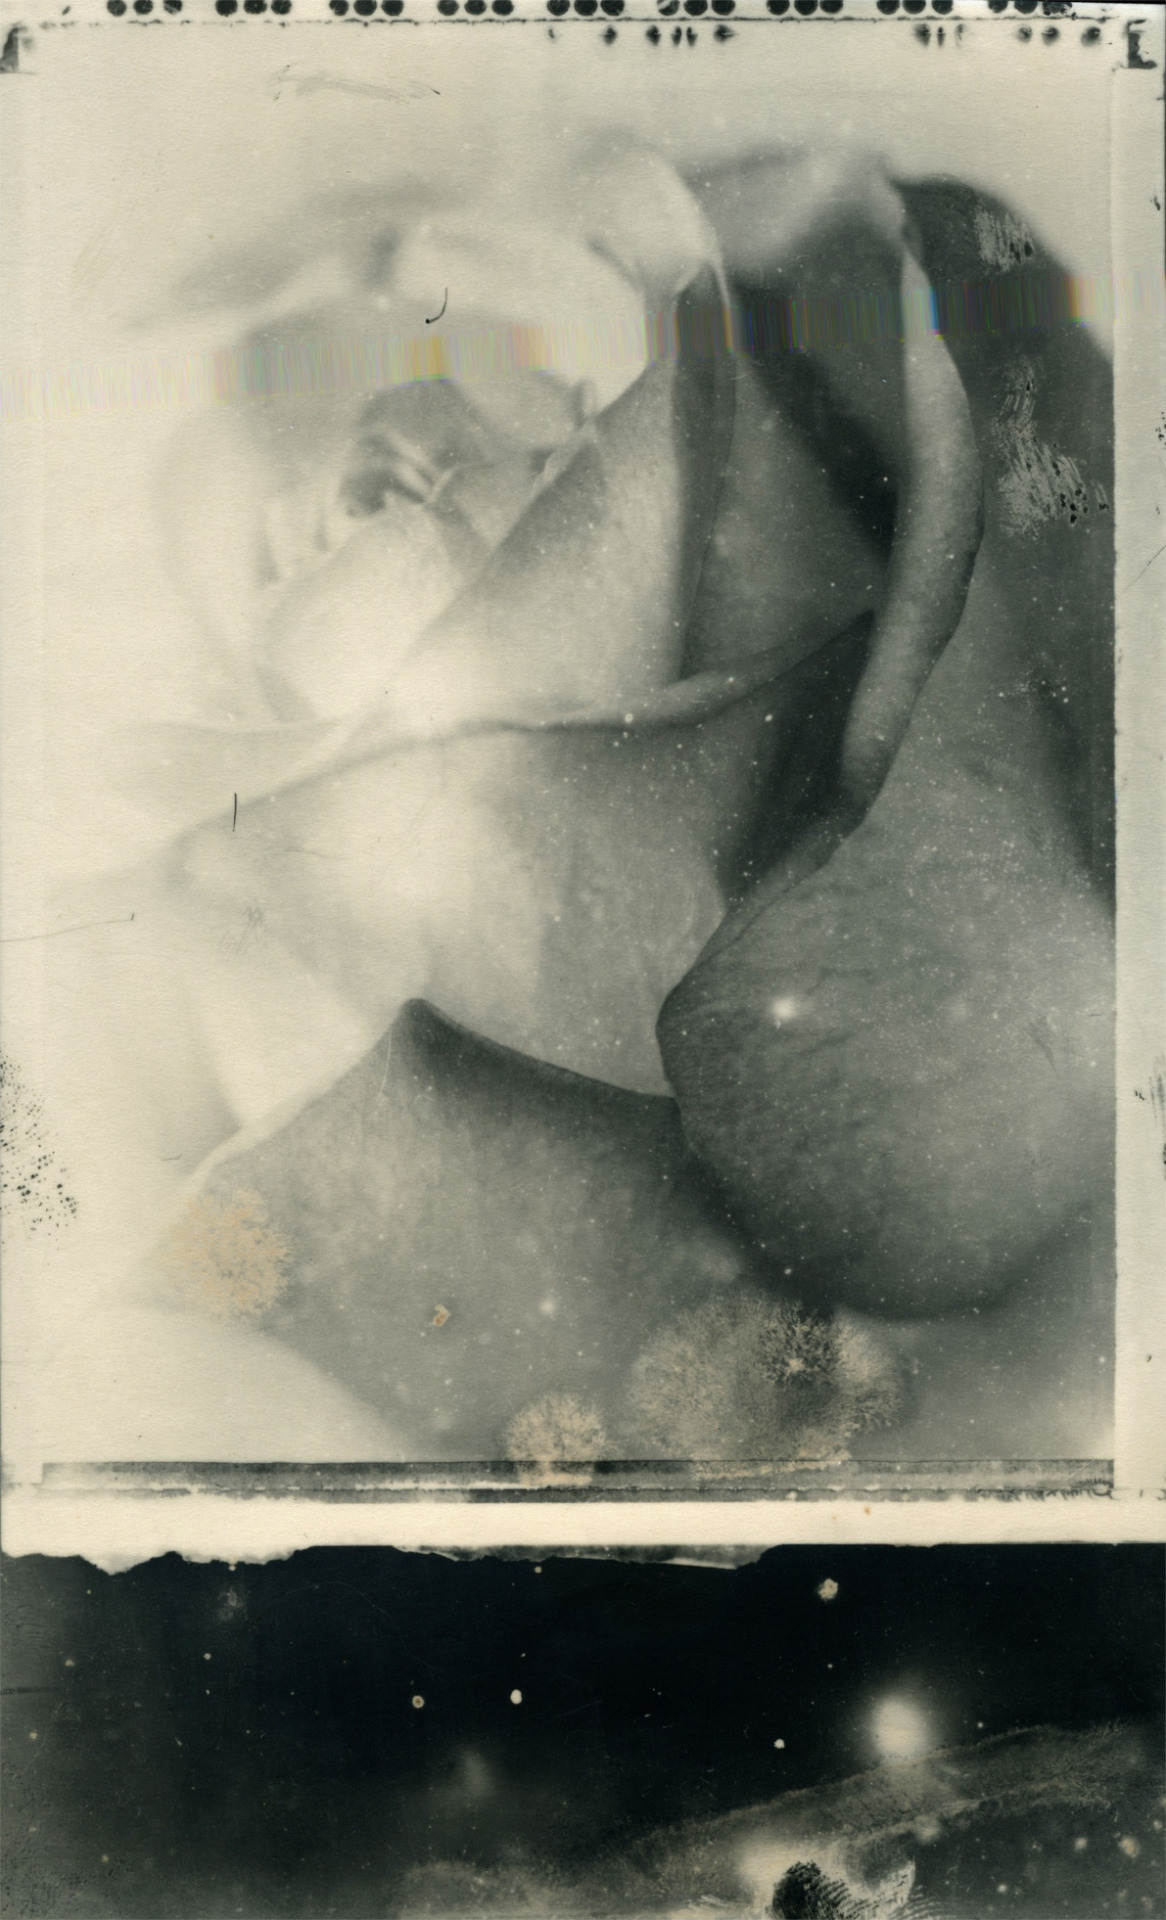 brandnew (tainted beauty)
did some contact prints in the darkroom today.
polaroid 55, printed on old kentmere photographic paper
(with some scanner glitches)